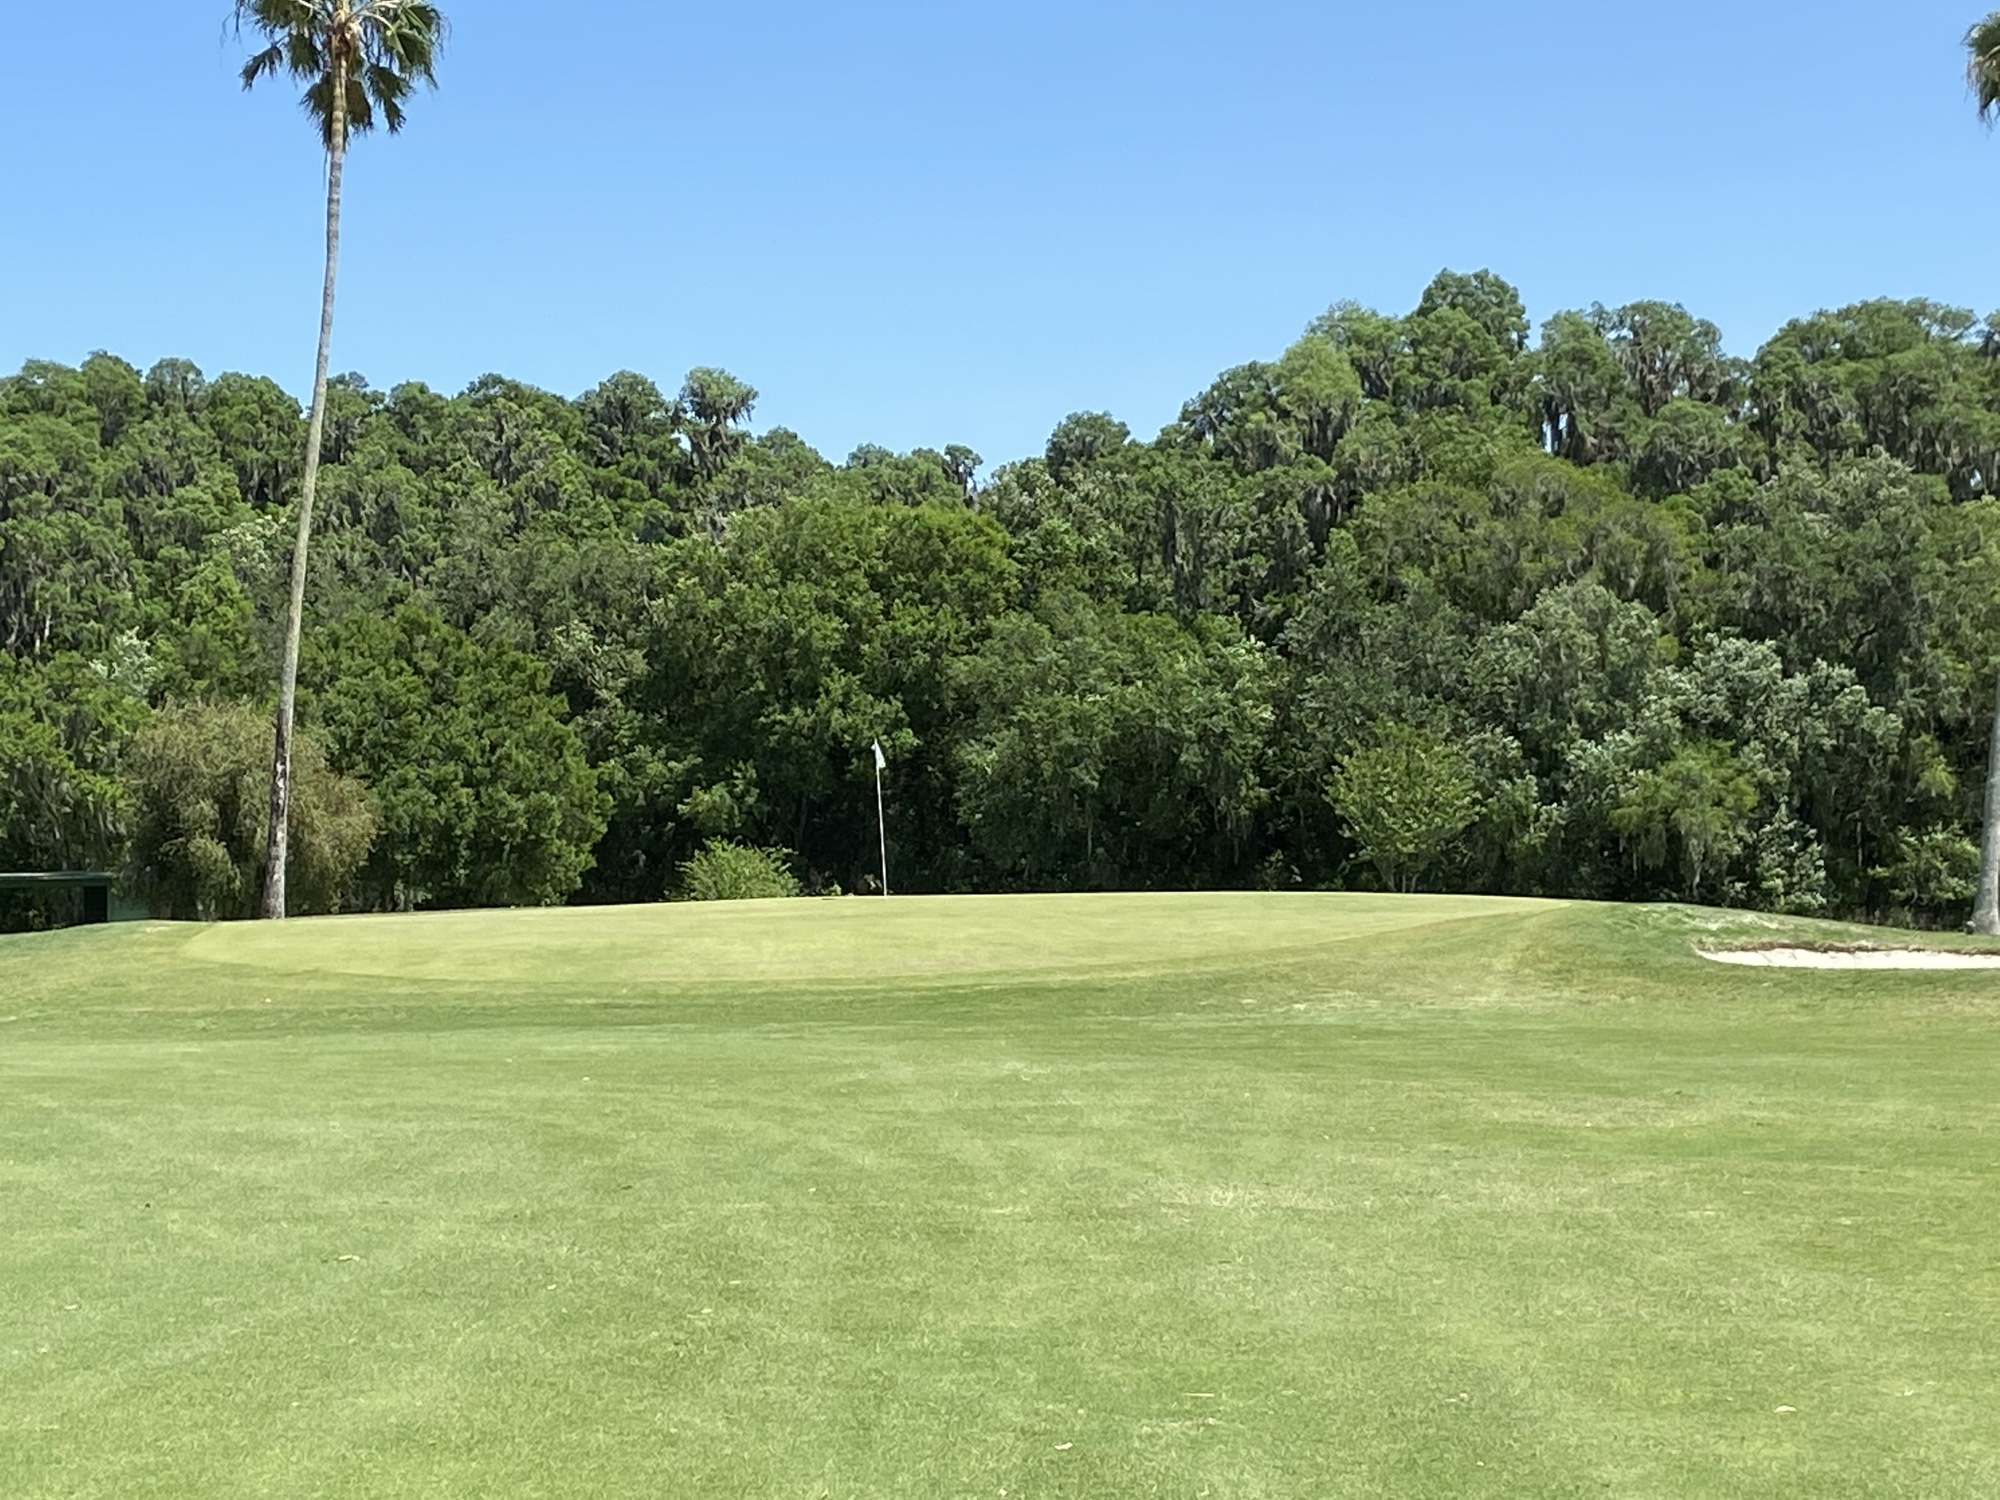 Bartow Golf Course also replaced all the sand in its bunkers. (Courtesy photo)